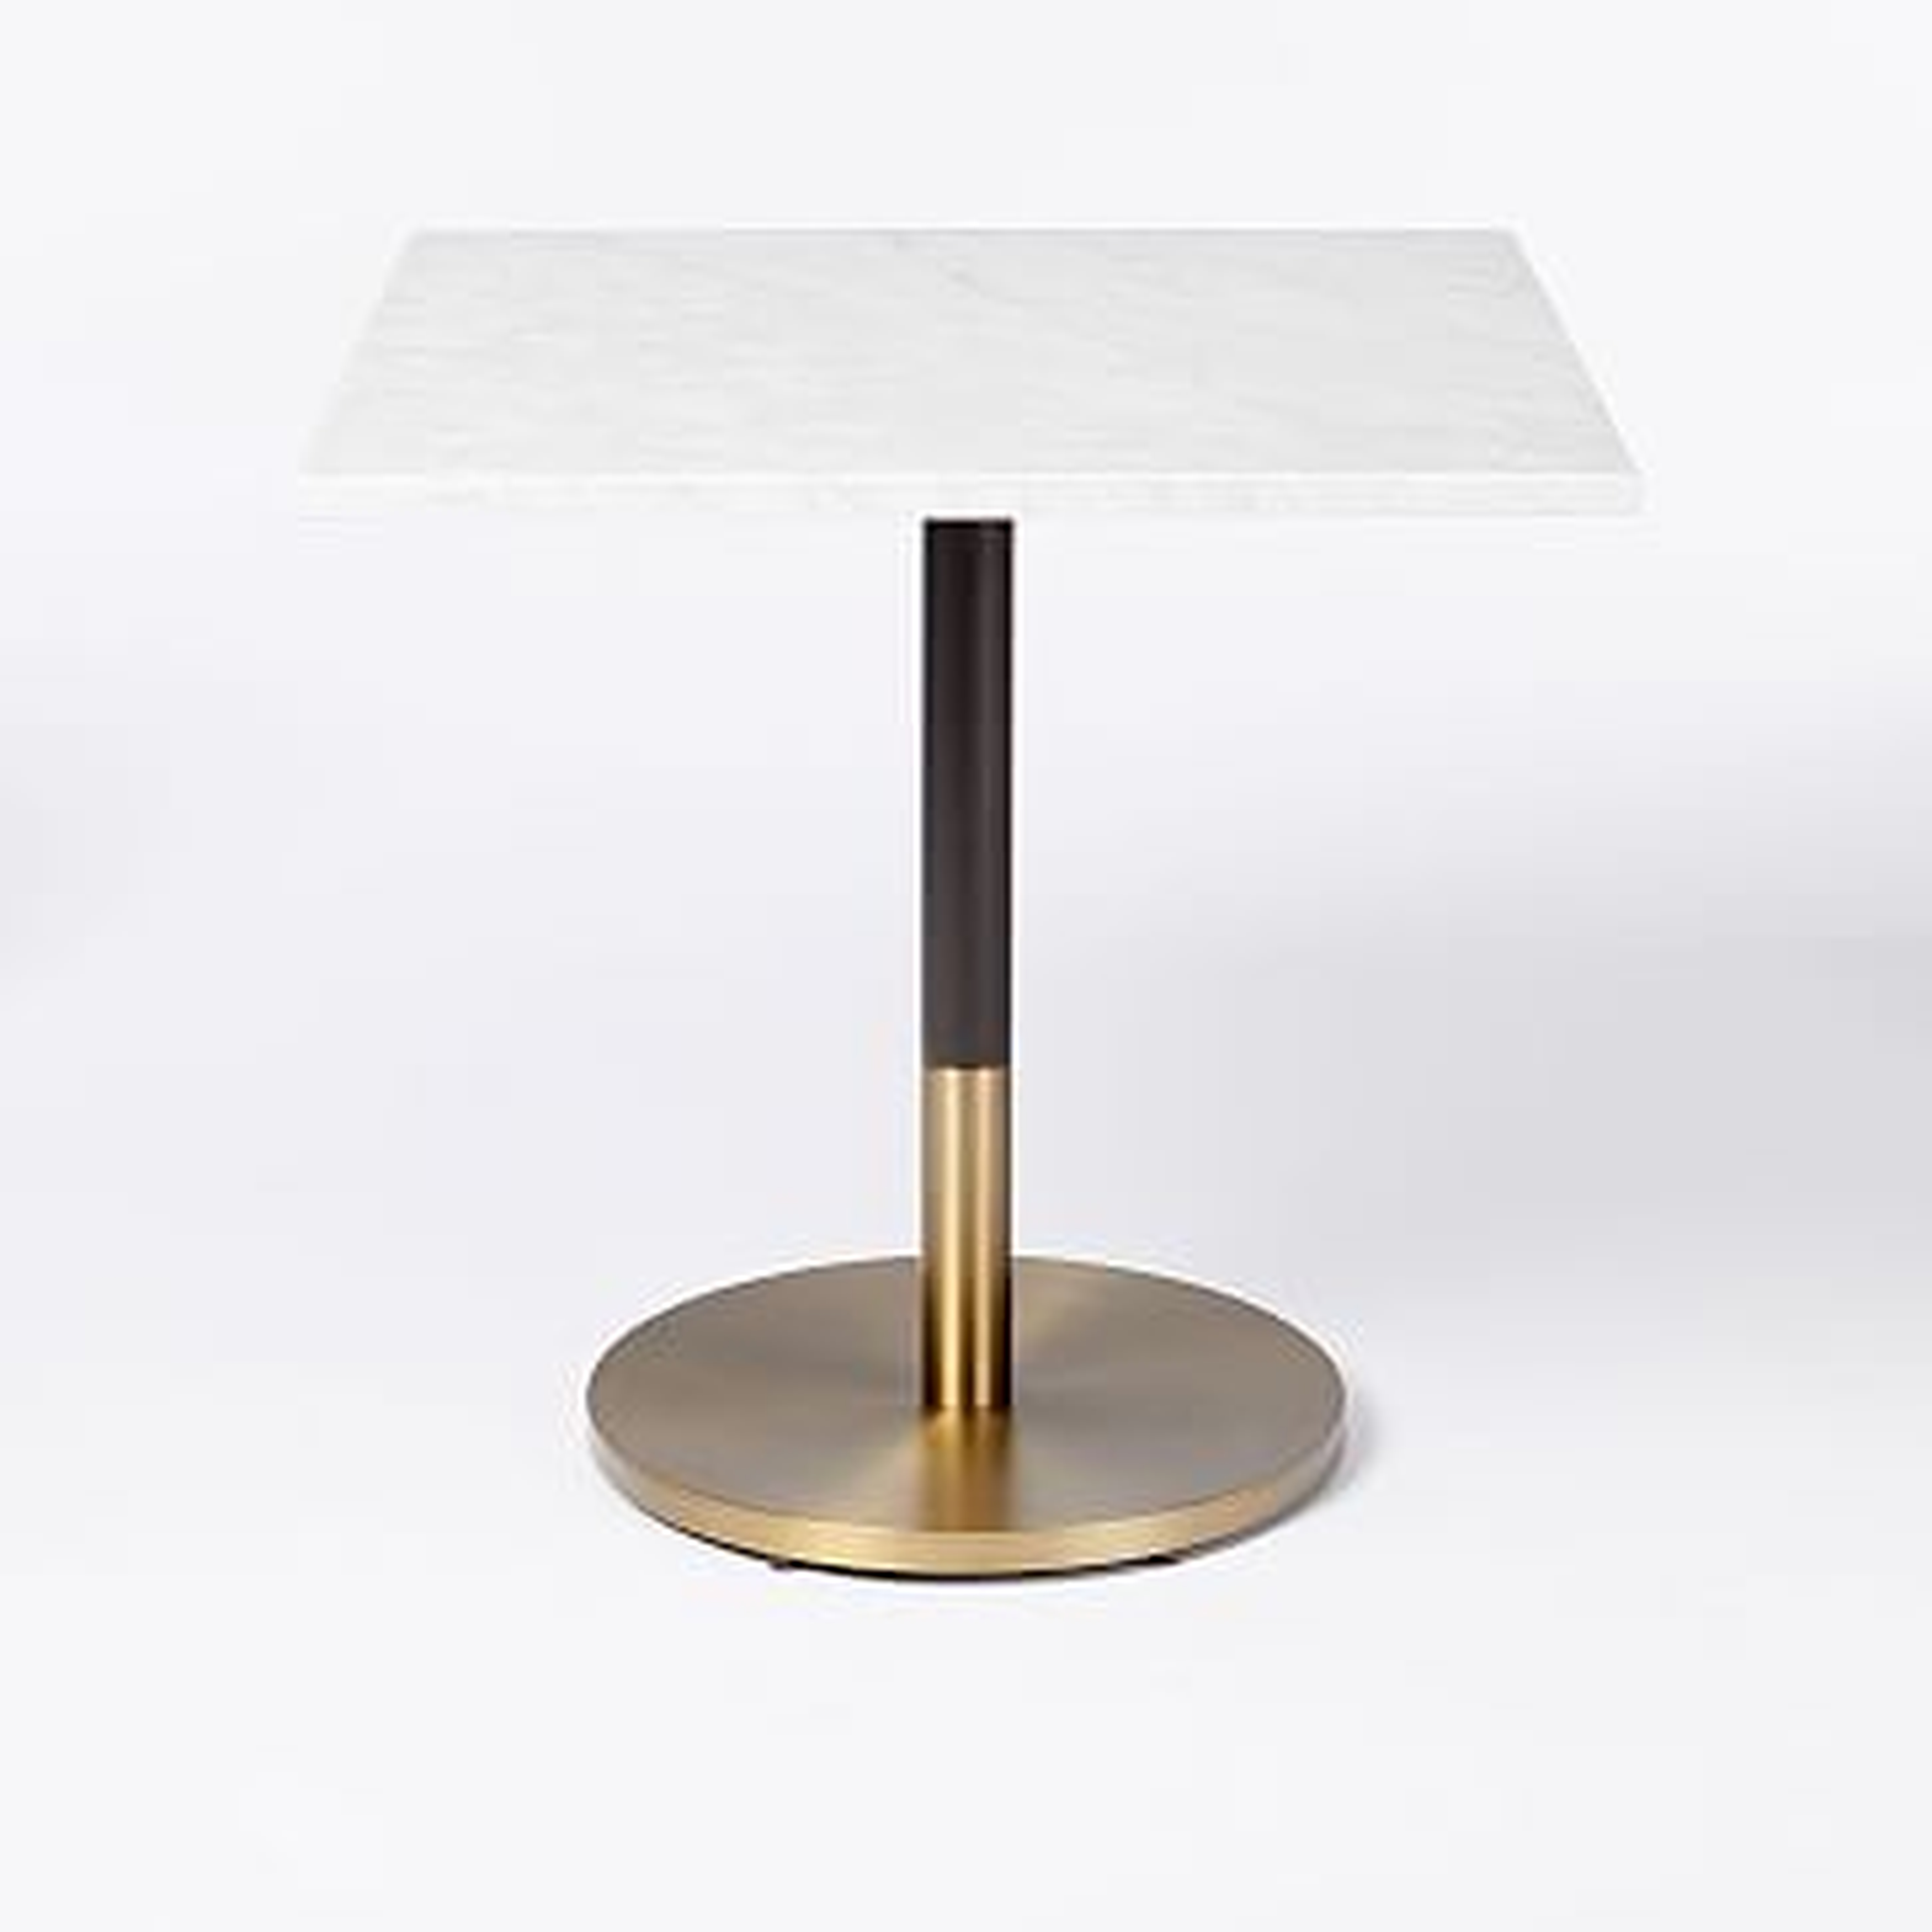 Orbit Base Square Dining Table, White Marble, Antique Bronze/Blackened Brass - West Elm